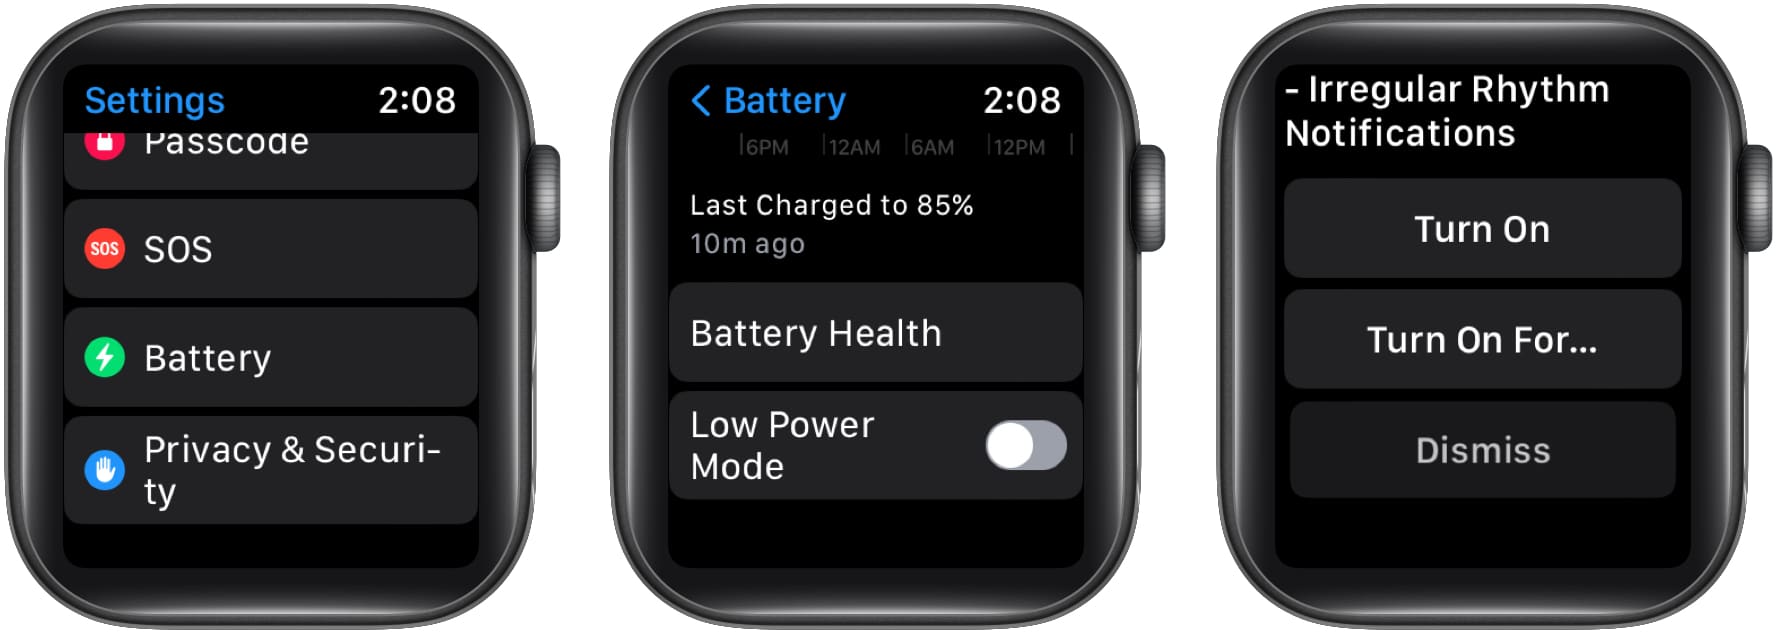 Enable the Low Power Mode from the Apple Watch Settings